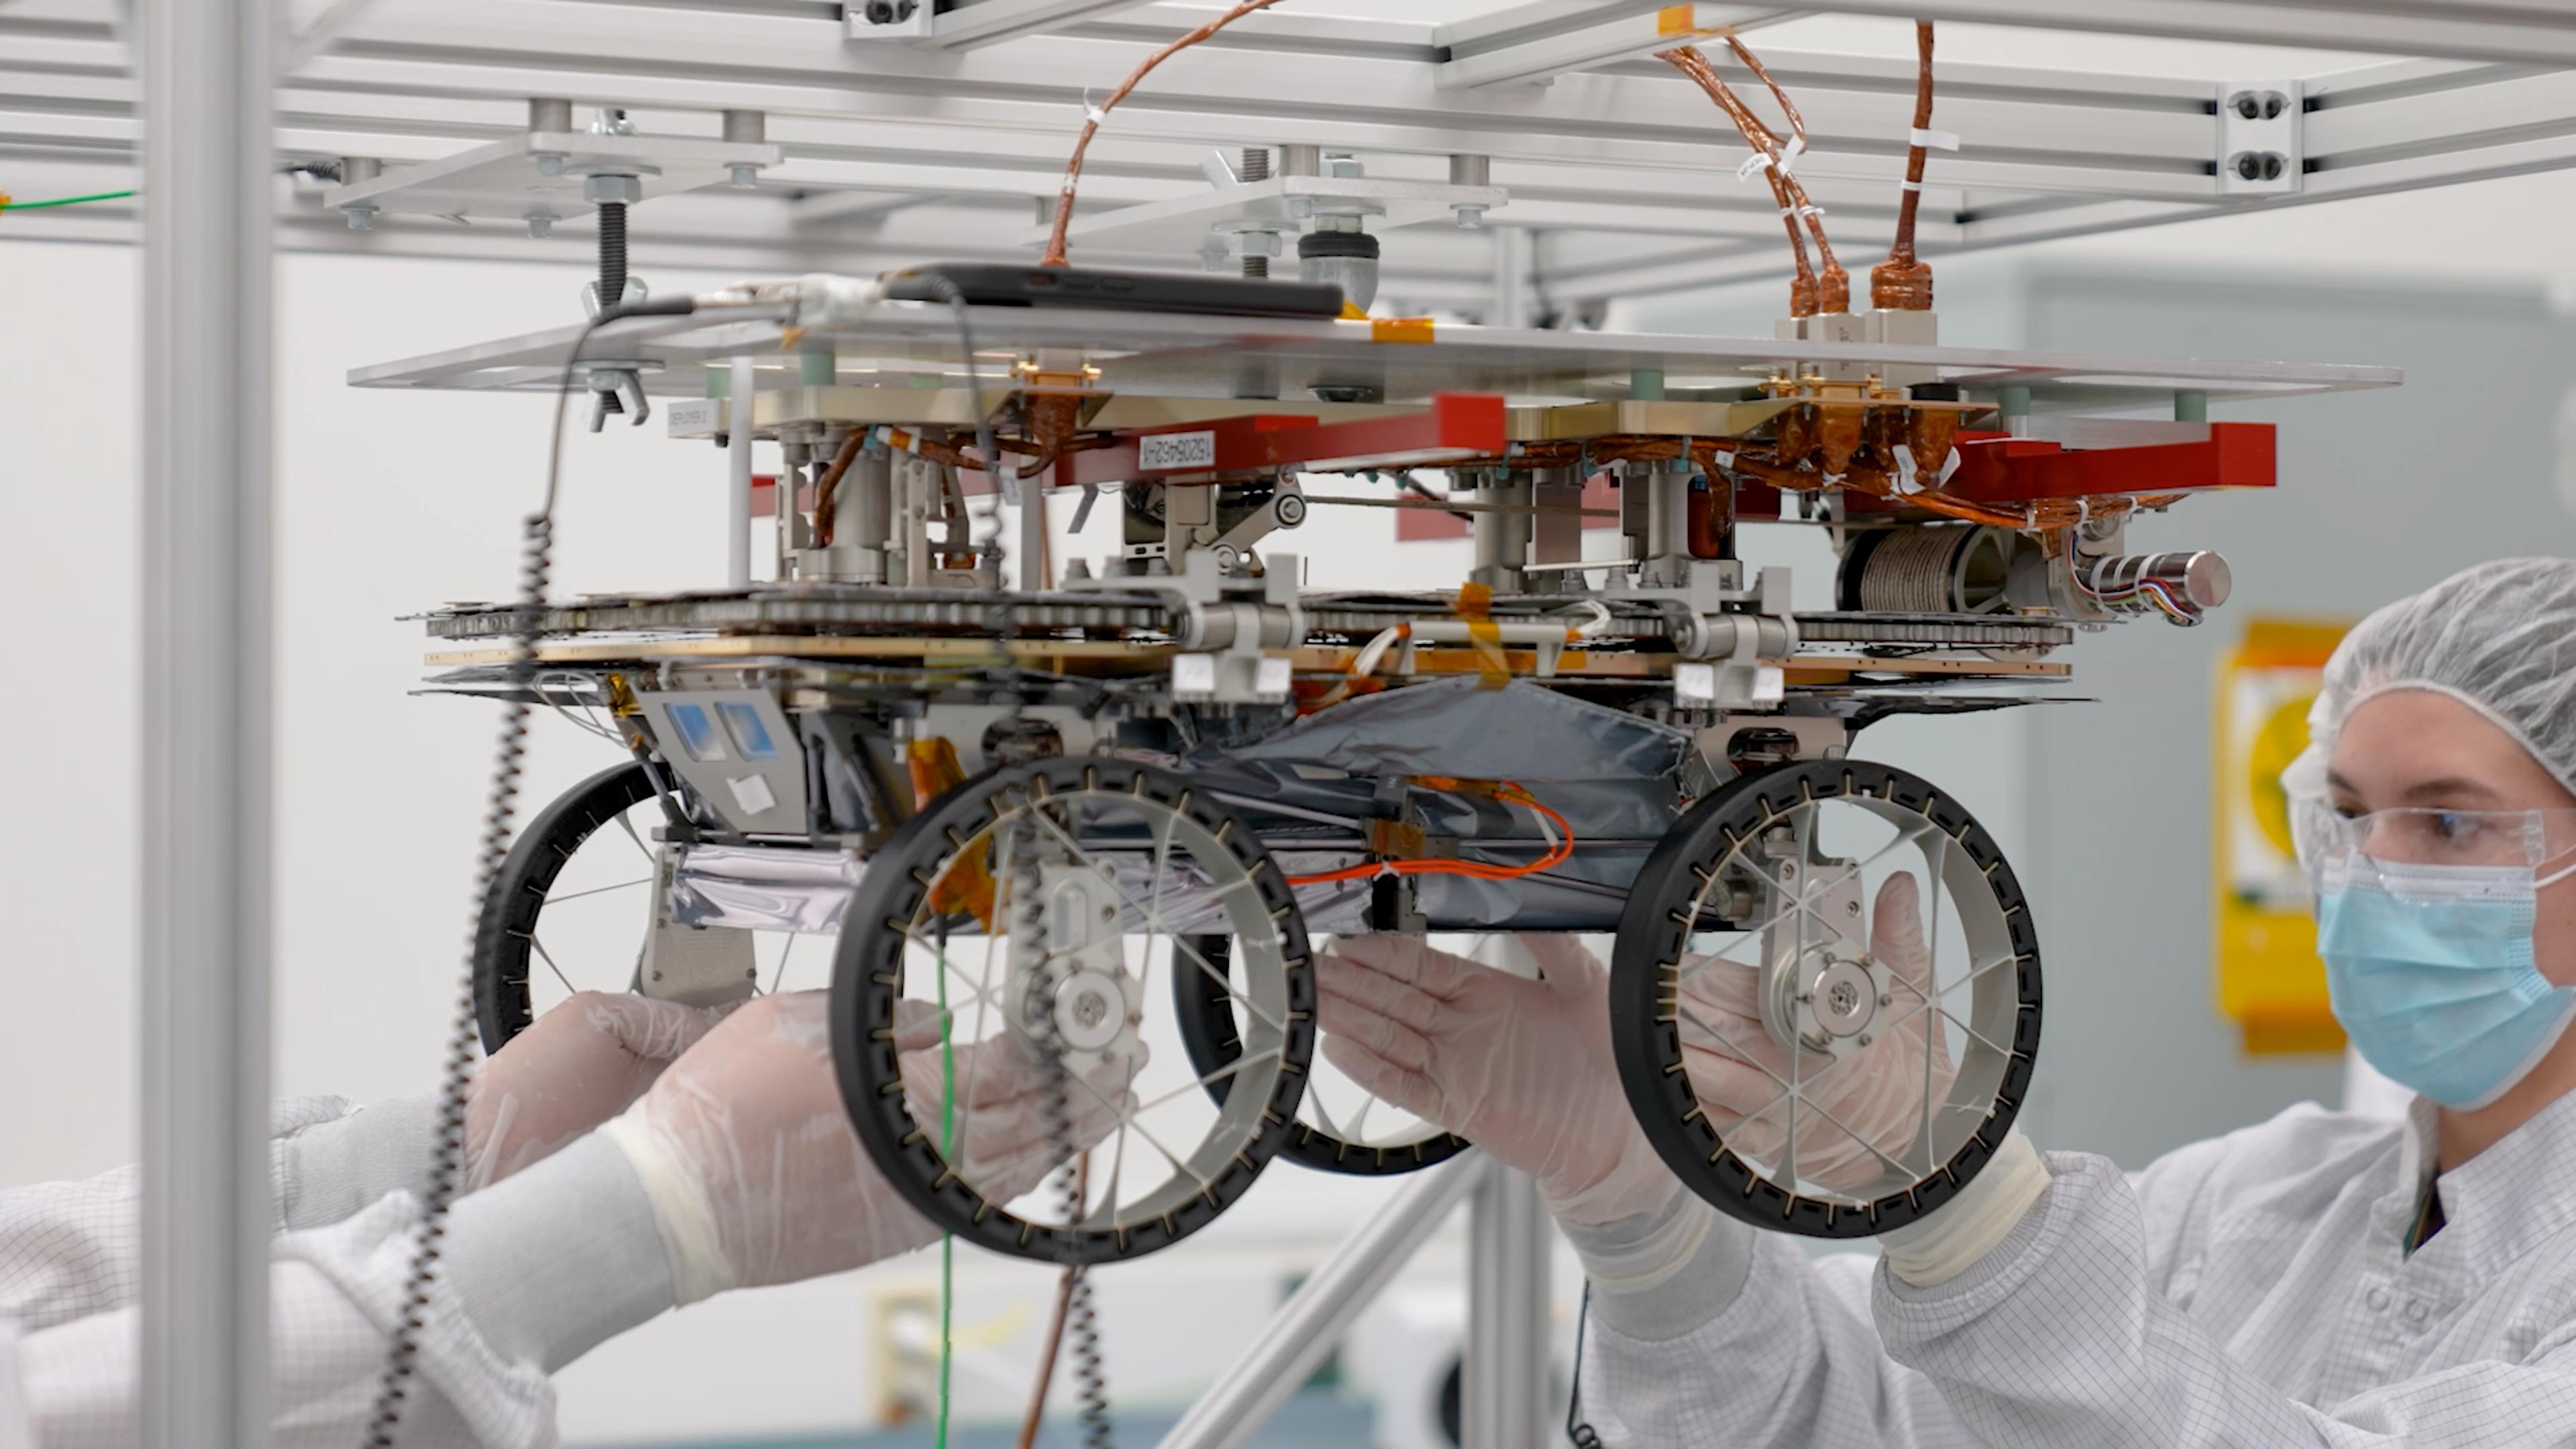 A small rover is attached to an elevated rack while two engineers hold their hands out toward the underside of the rover.